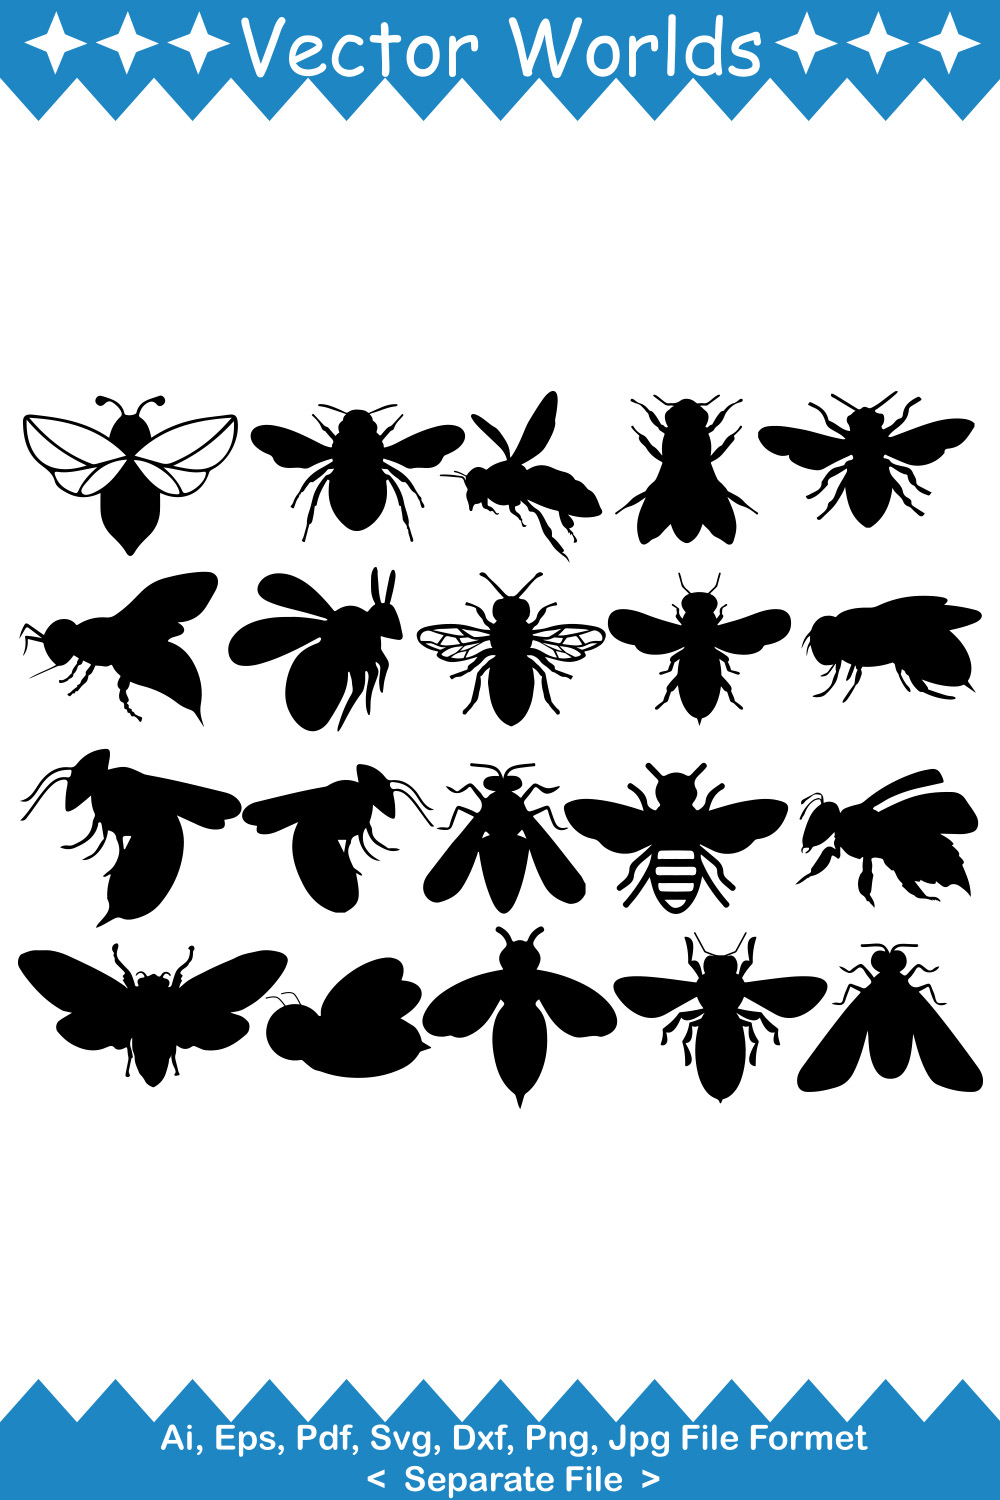 Collection of vector gorgeous images of bee silhouettes.